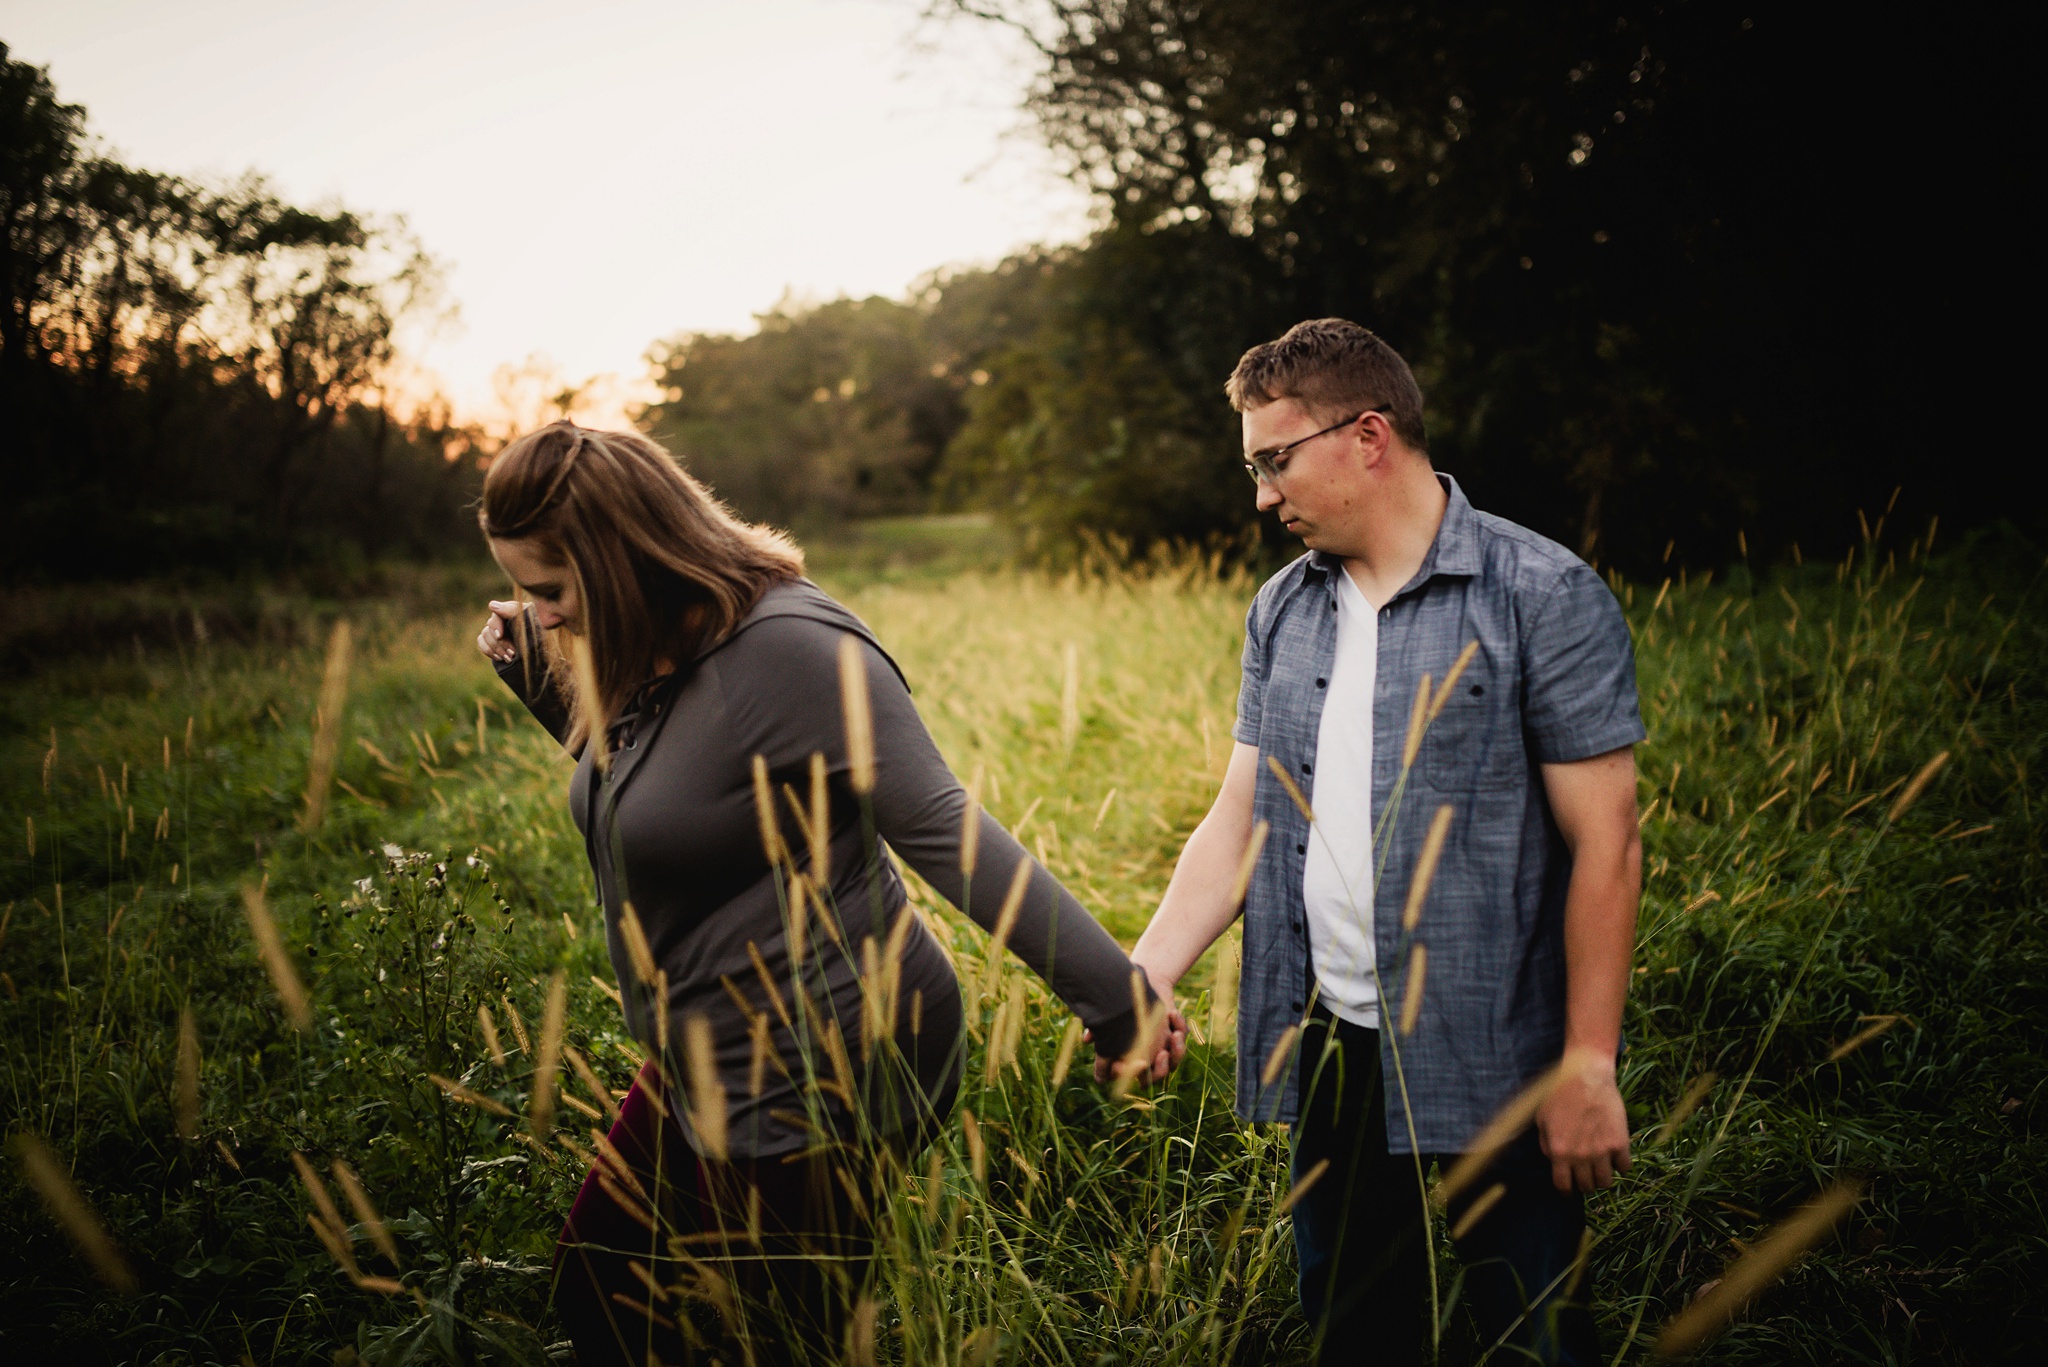 Sidie Hollow Fall Engagement Session